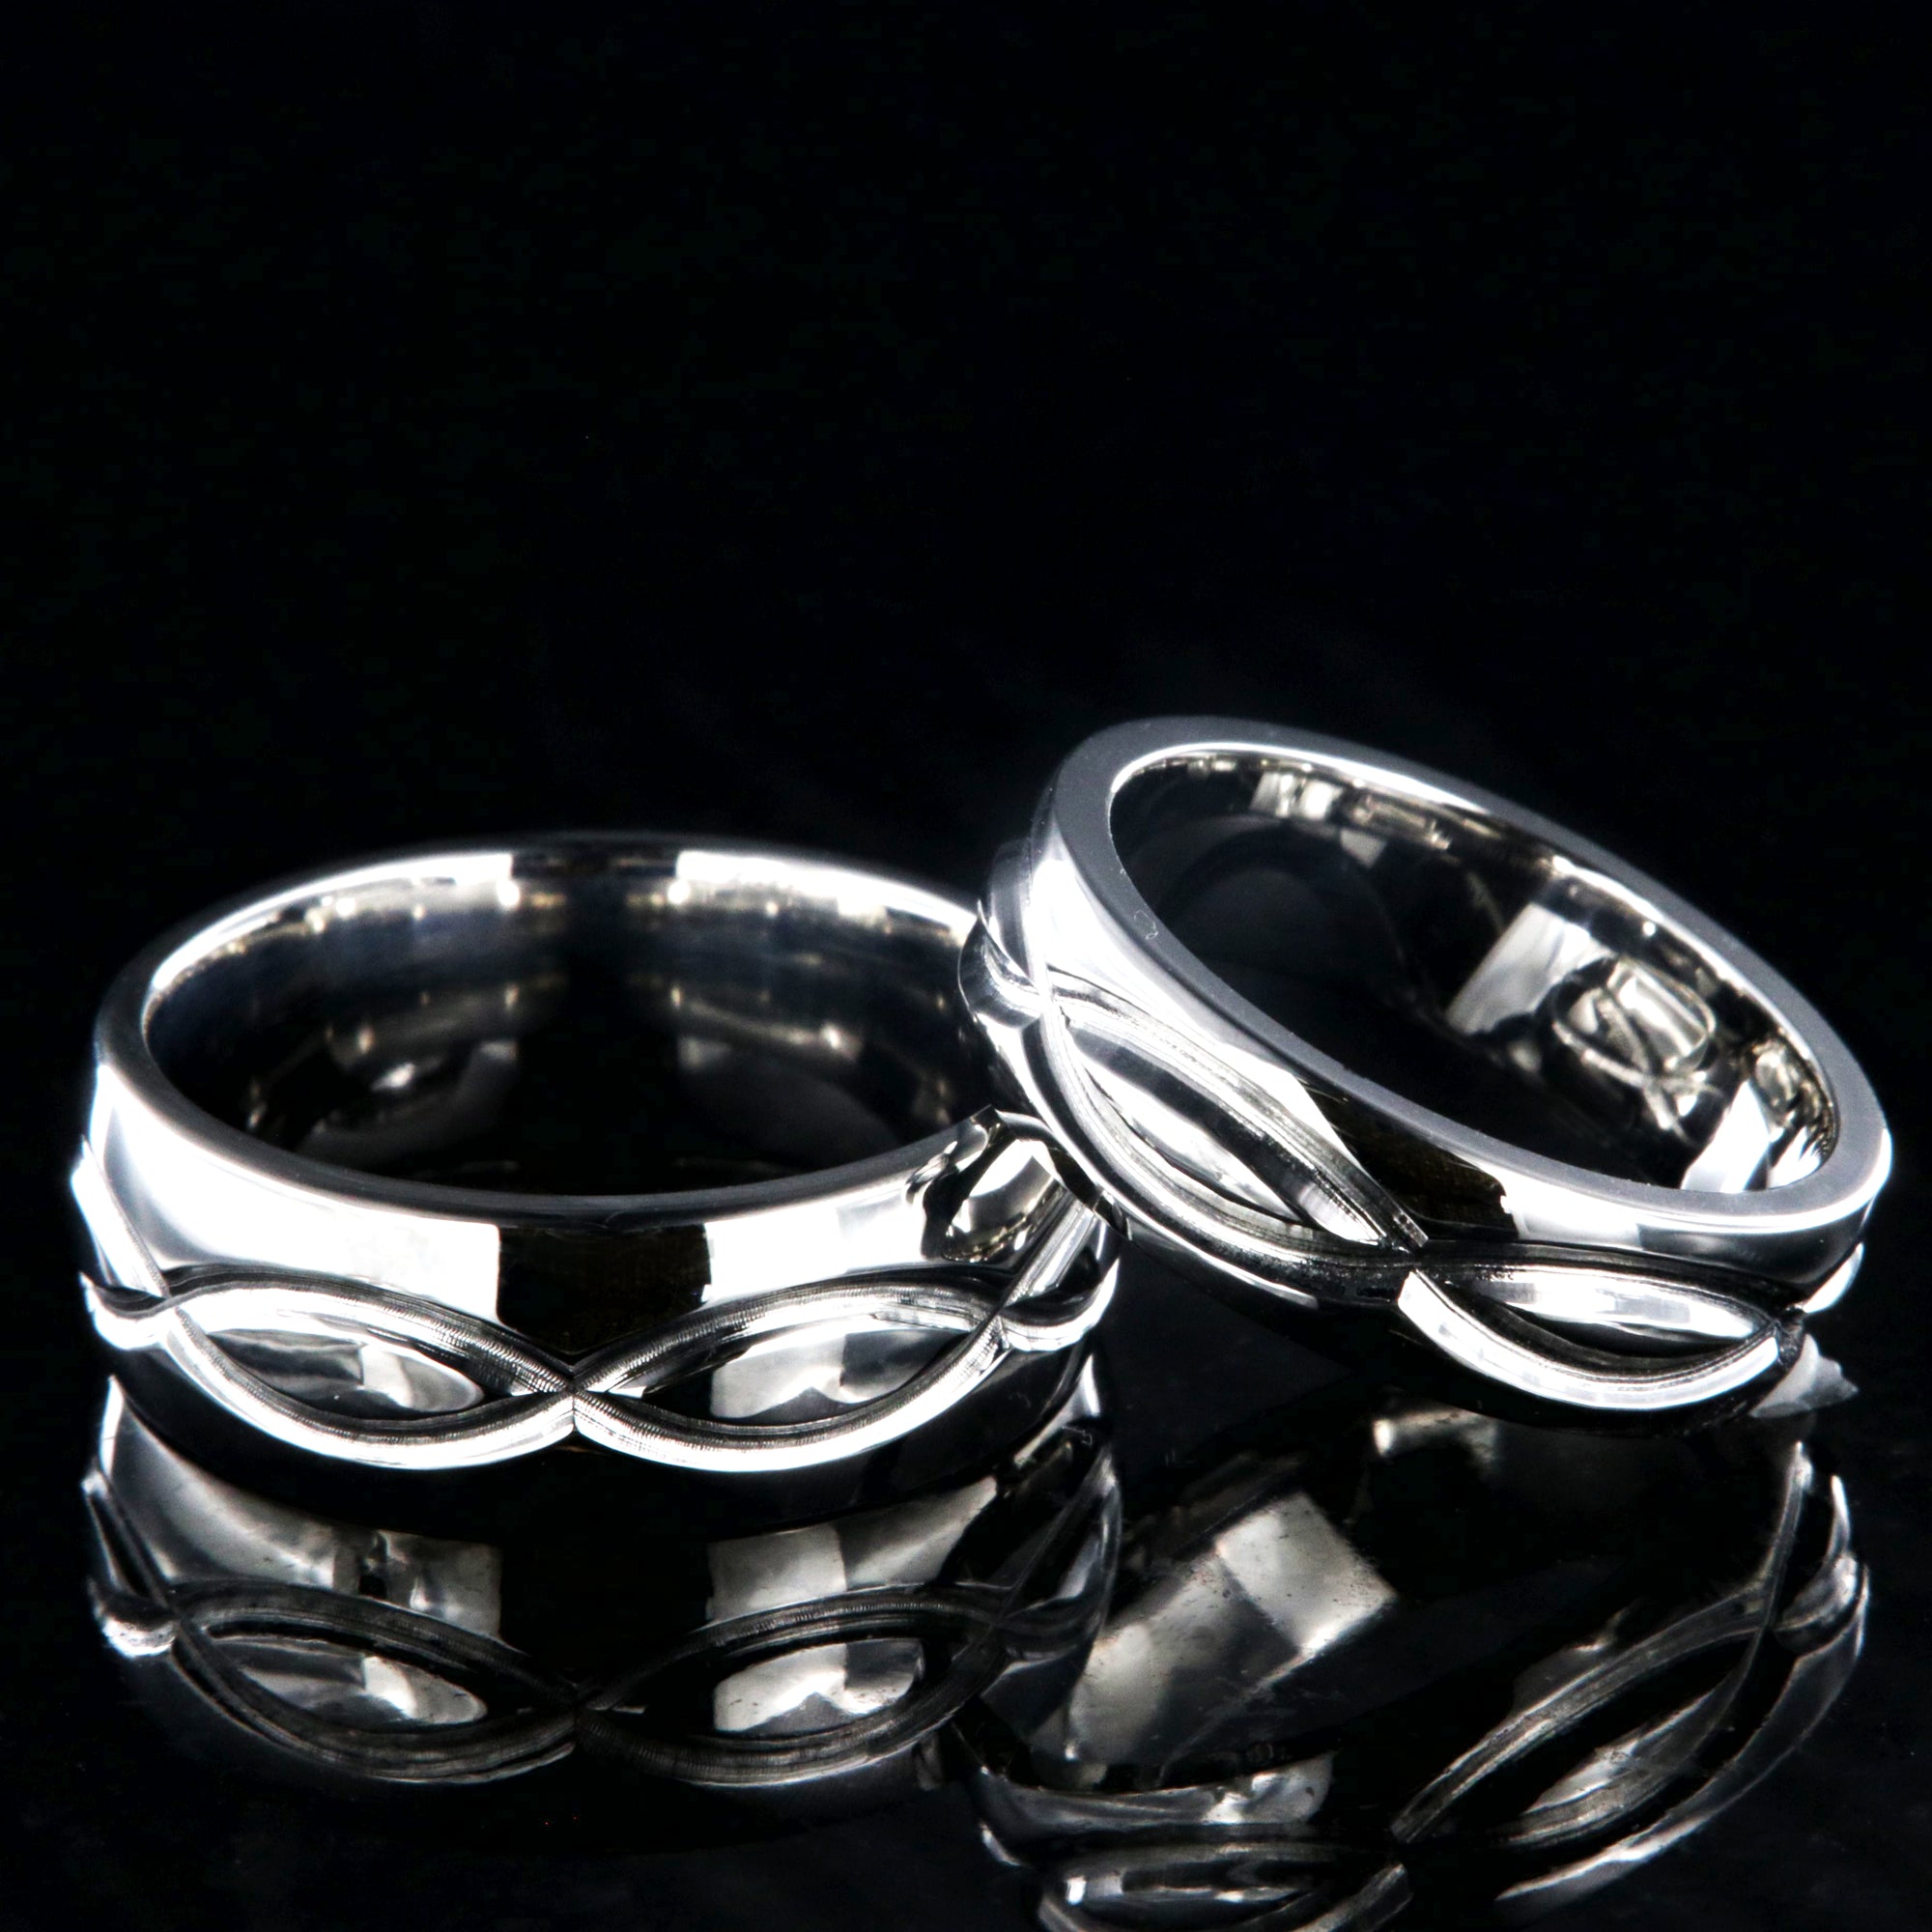 Matching infinity ring set with an 8mm and 6mm wide rings and milled infinity designs